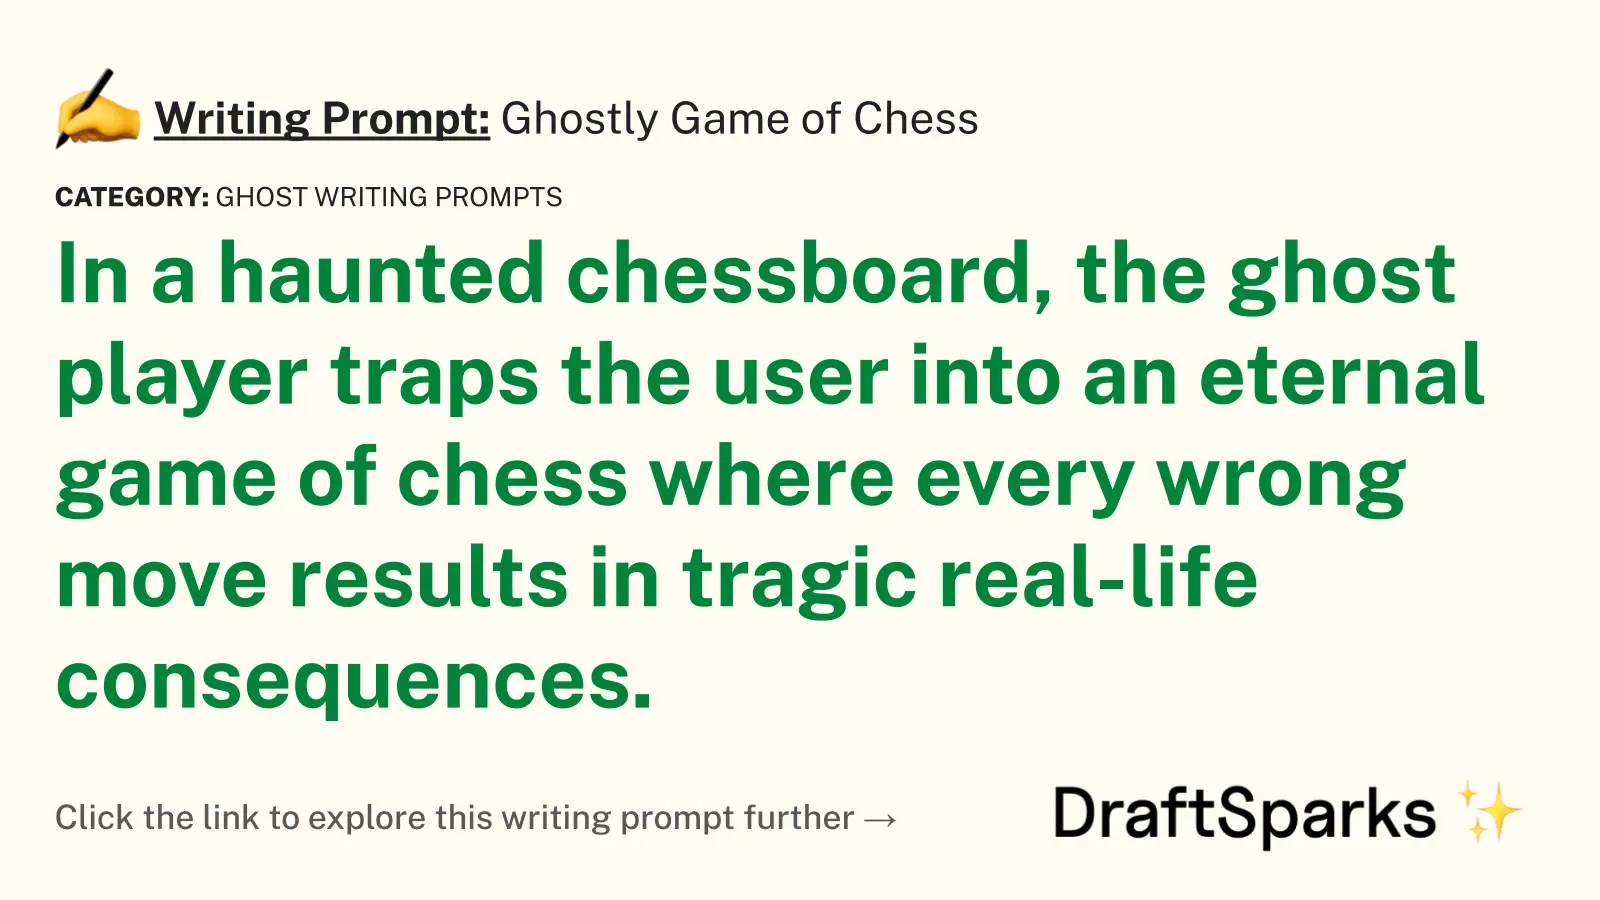 Ghostly Game of Chess